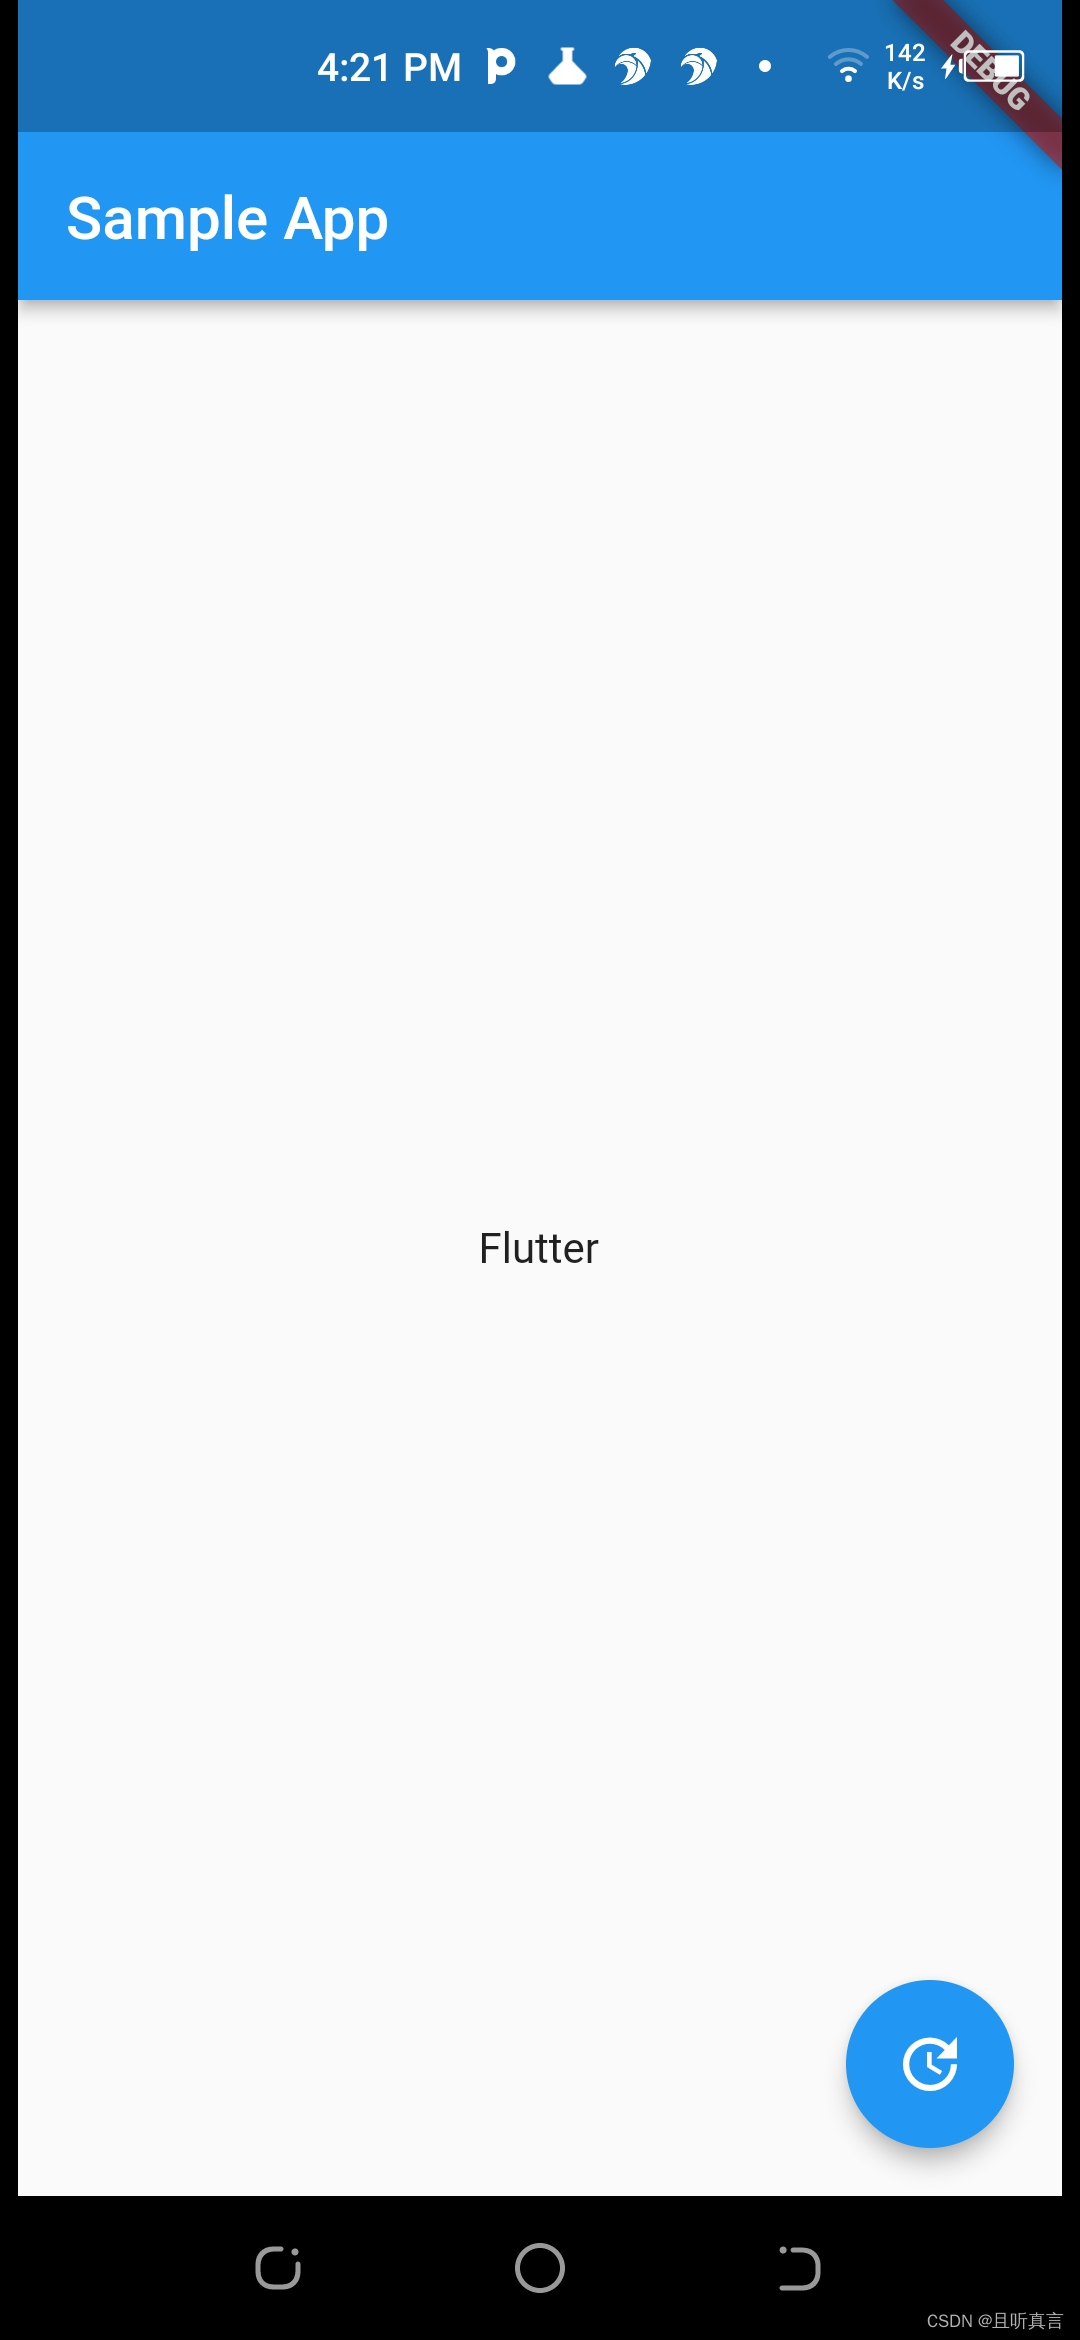 Flutter for Android